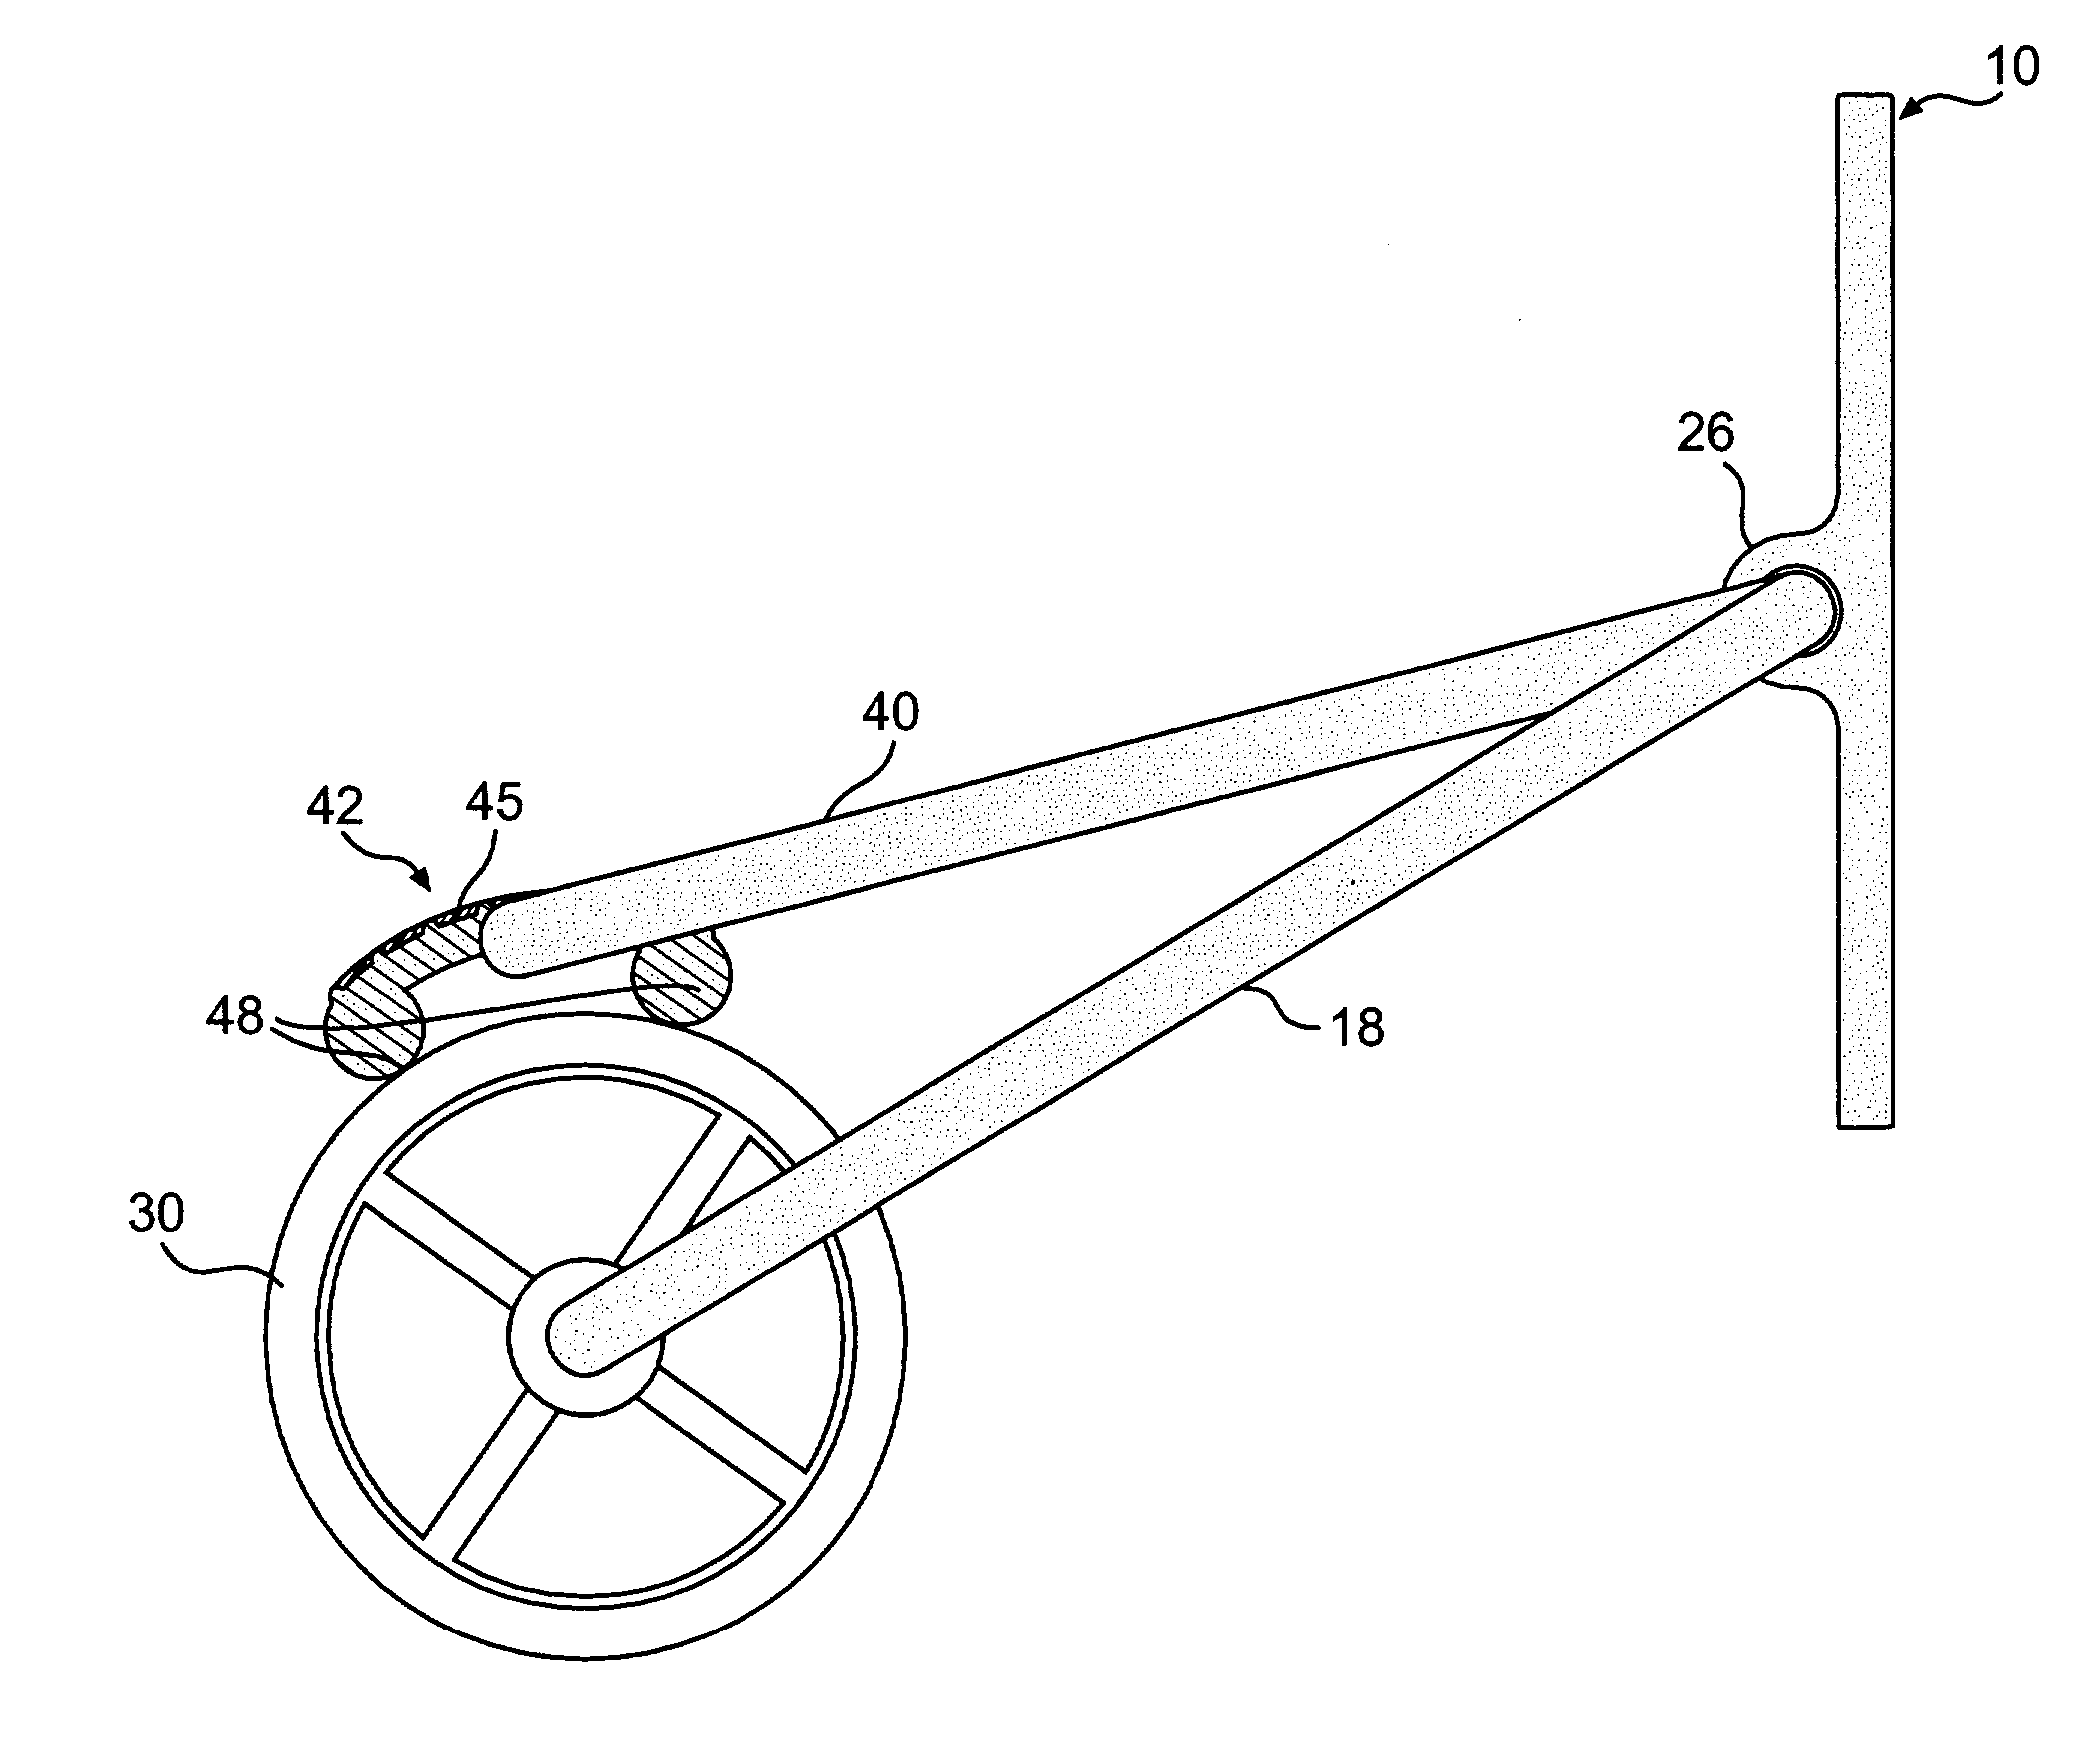 Frictional surface apparatus for one handed dispensing of paper sheet segments